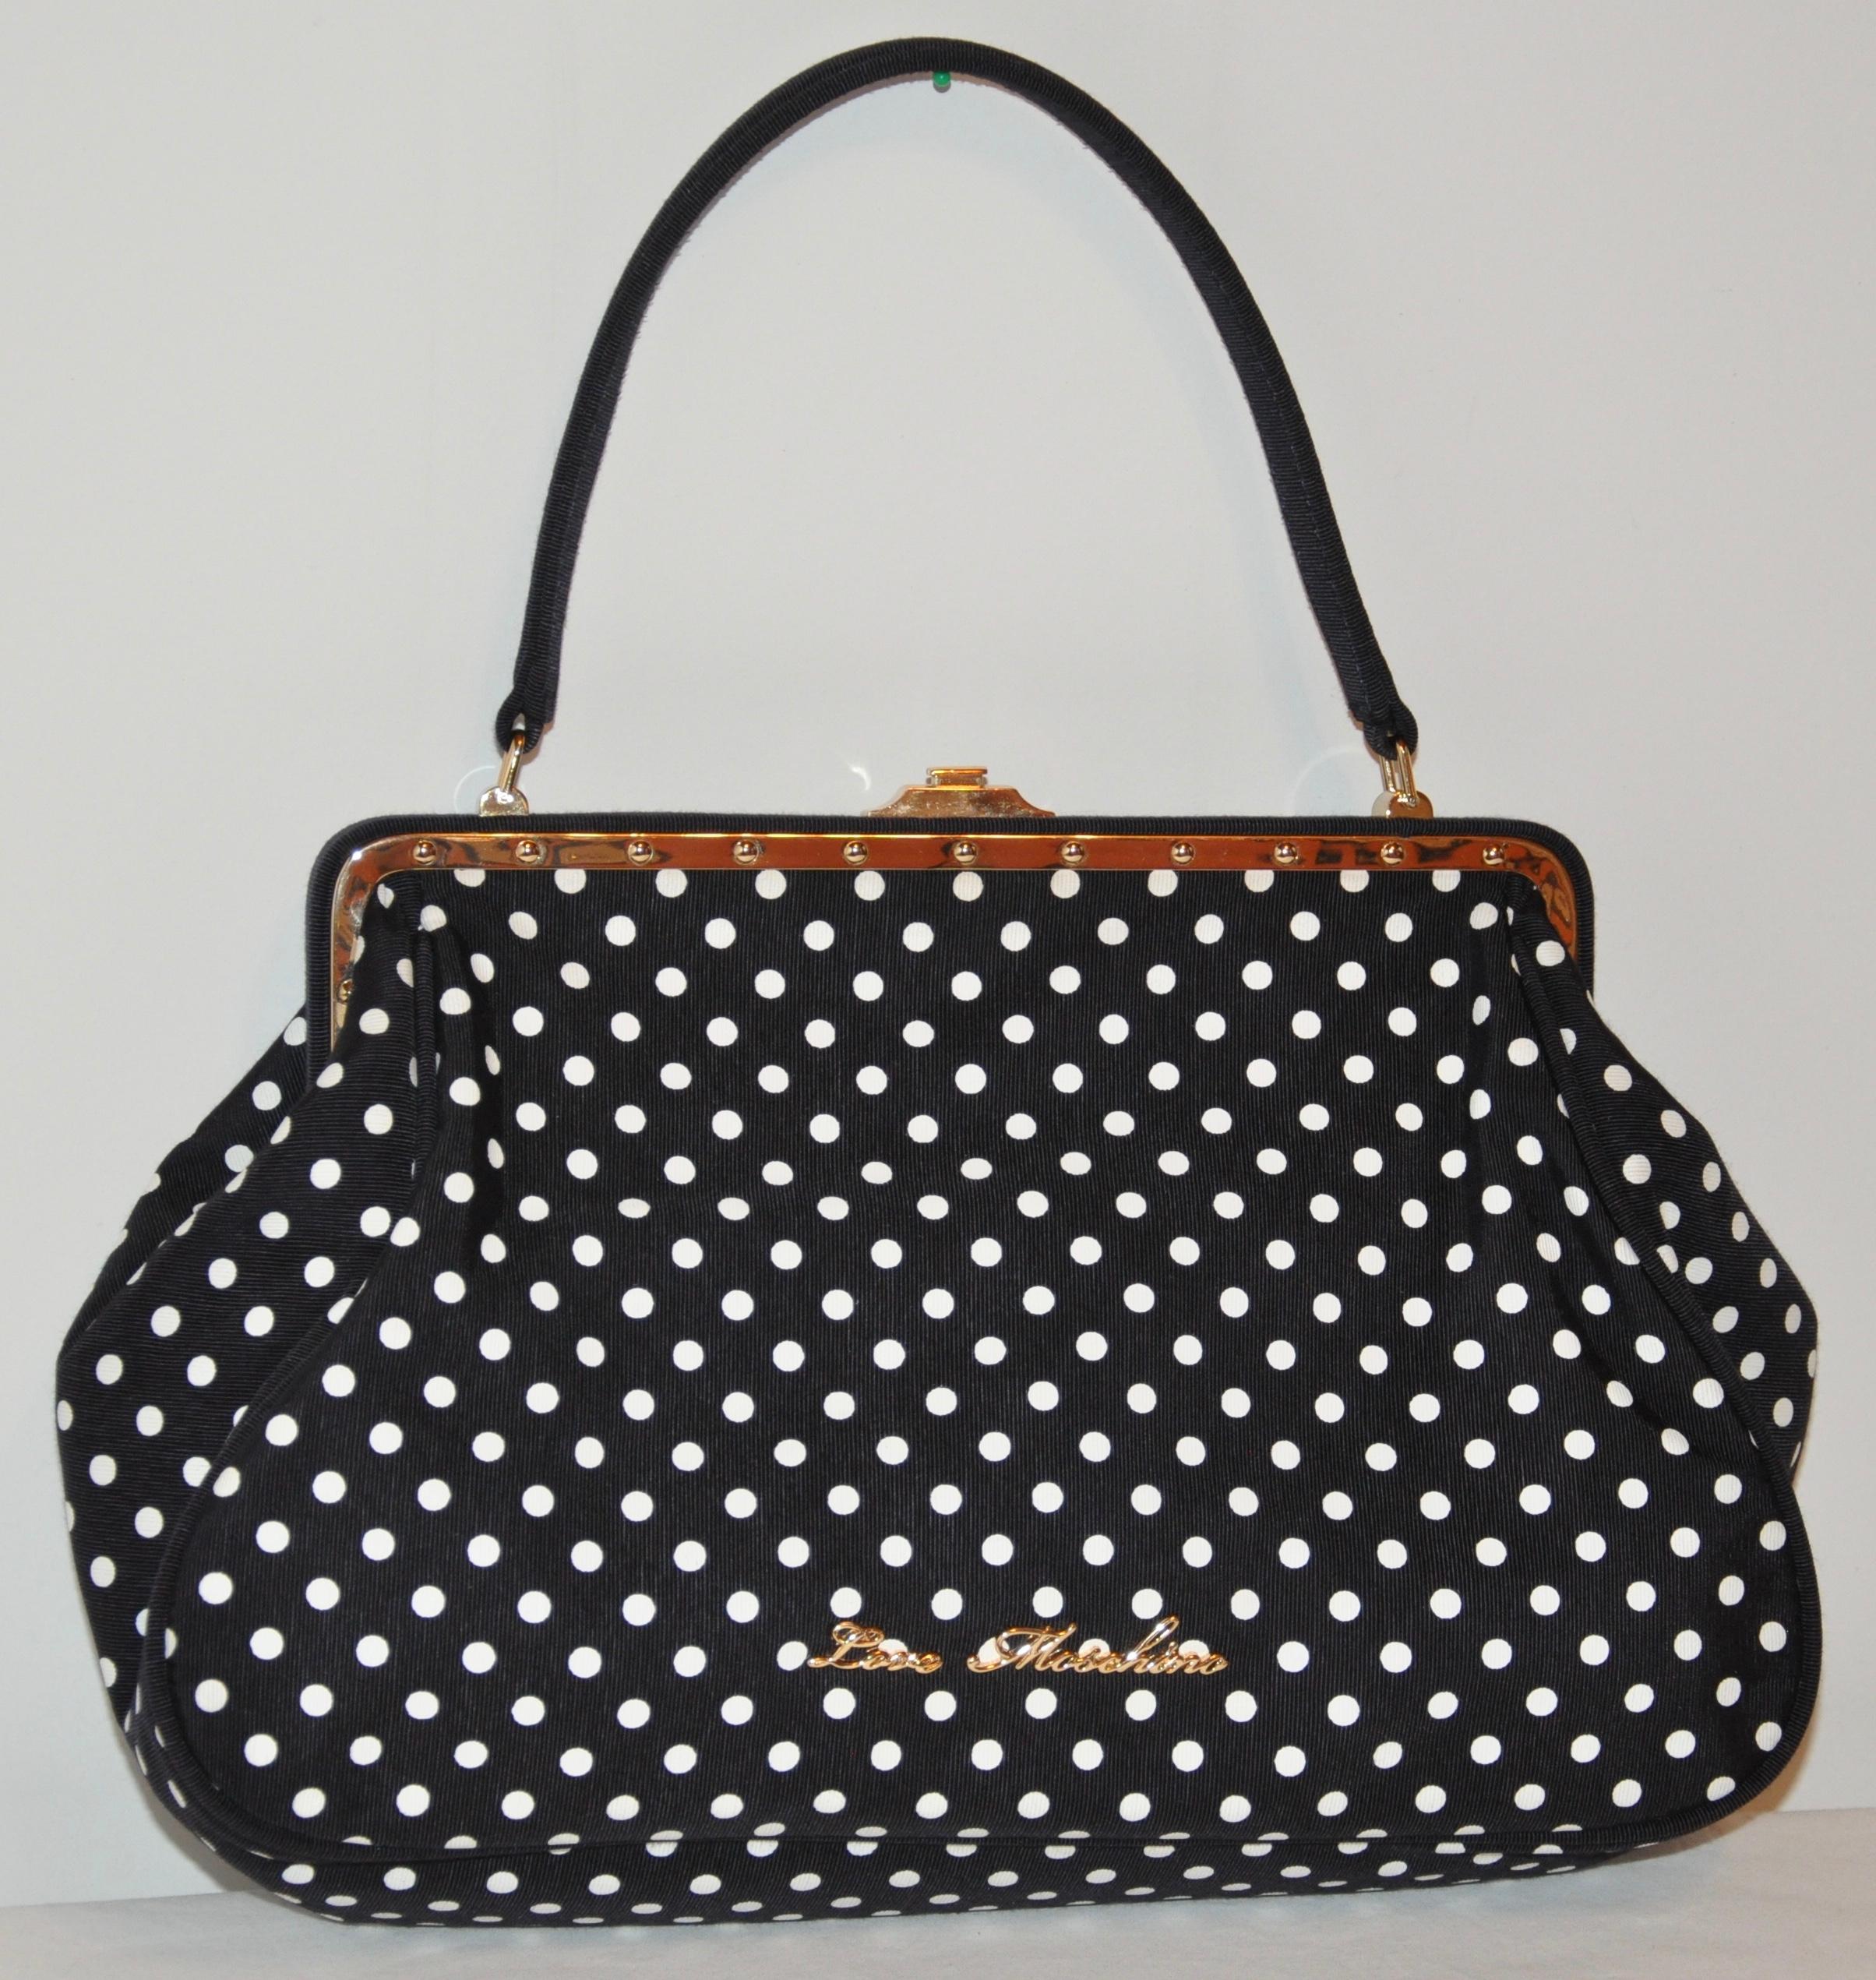 Moschino wonderfully elegant yet whimsical textured black with white polka dot silk handbag is accented with a polished gilded gold hardware frame. The opening on top is a 